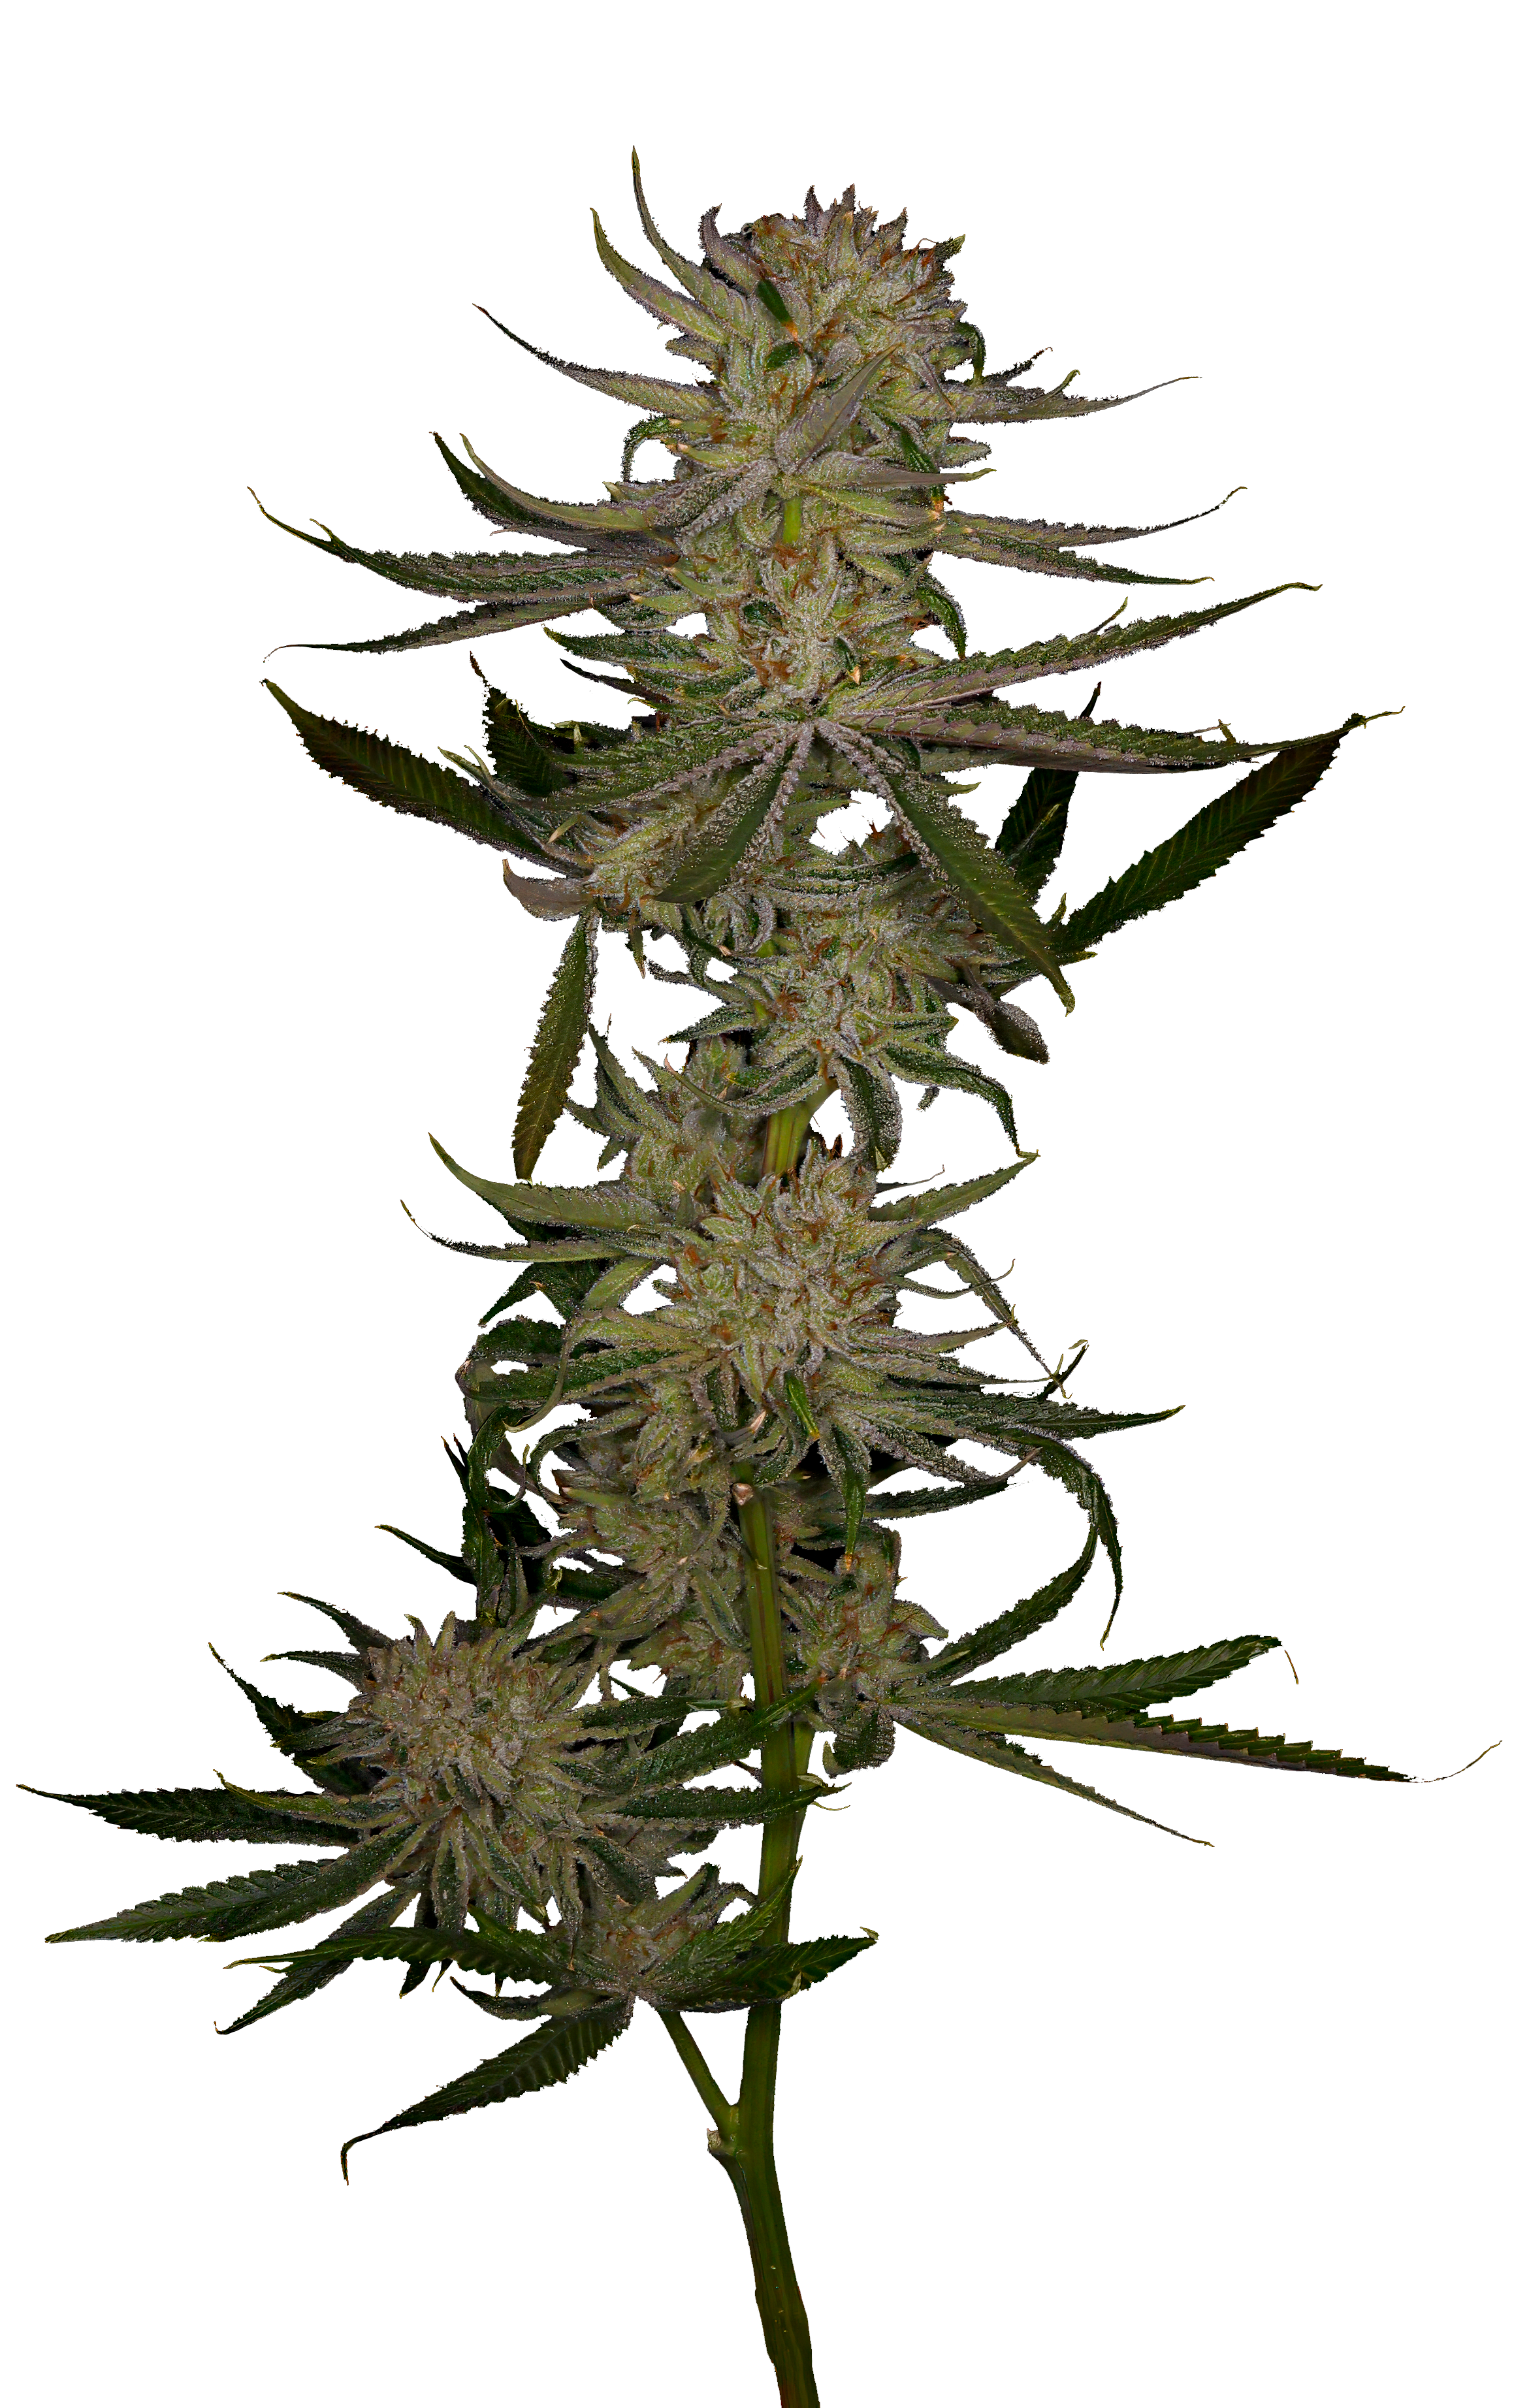 Cola shot of the Power Nap cultivar from GraniteLeaf Cannabis.